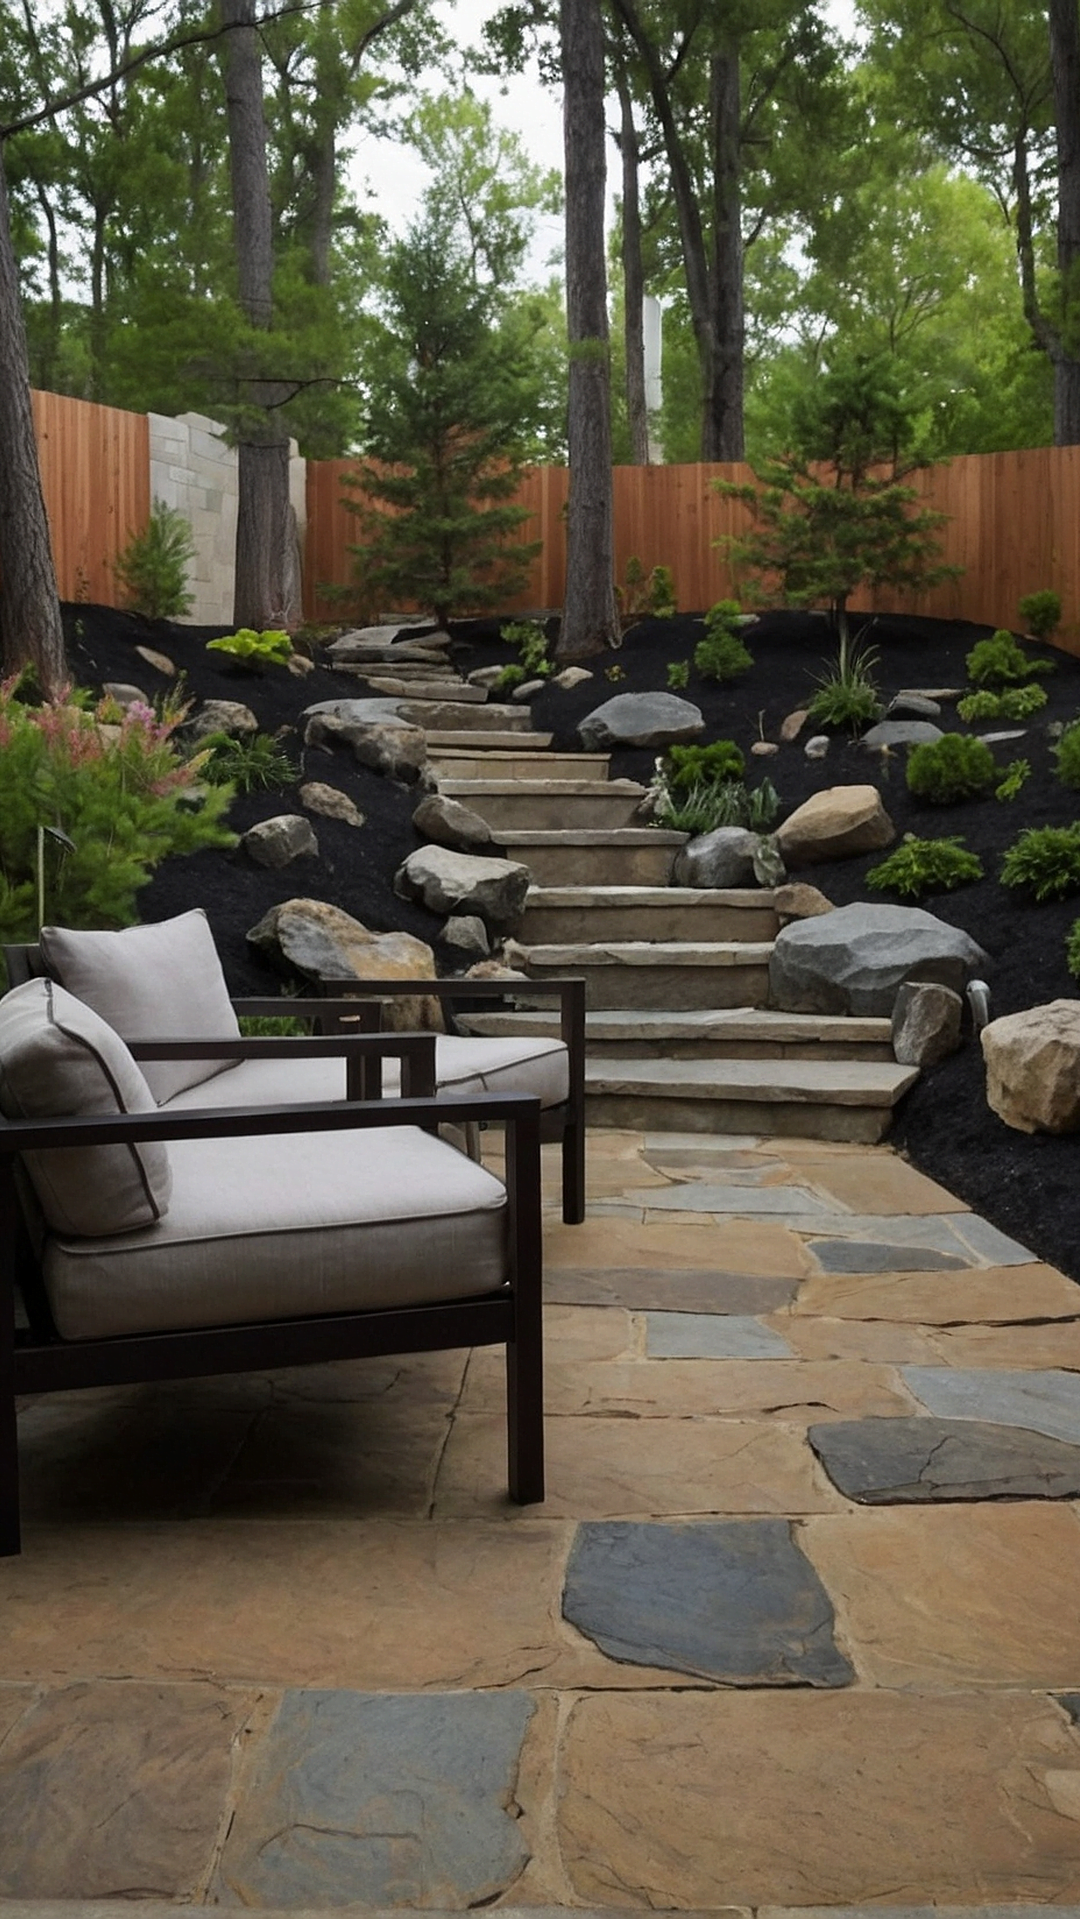 Rockbound Beauties: Stunning Landscaping with Large Rocks